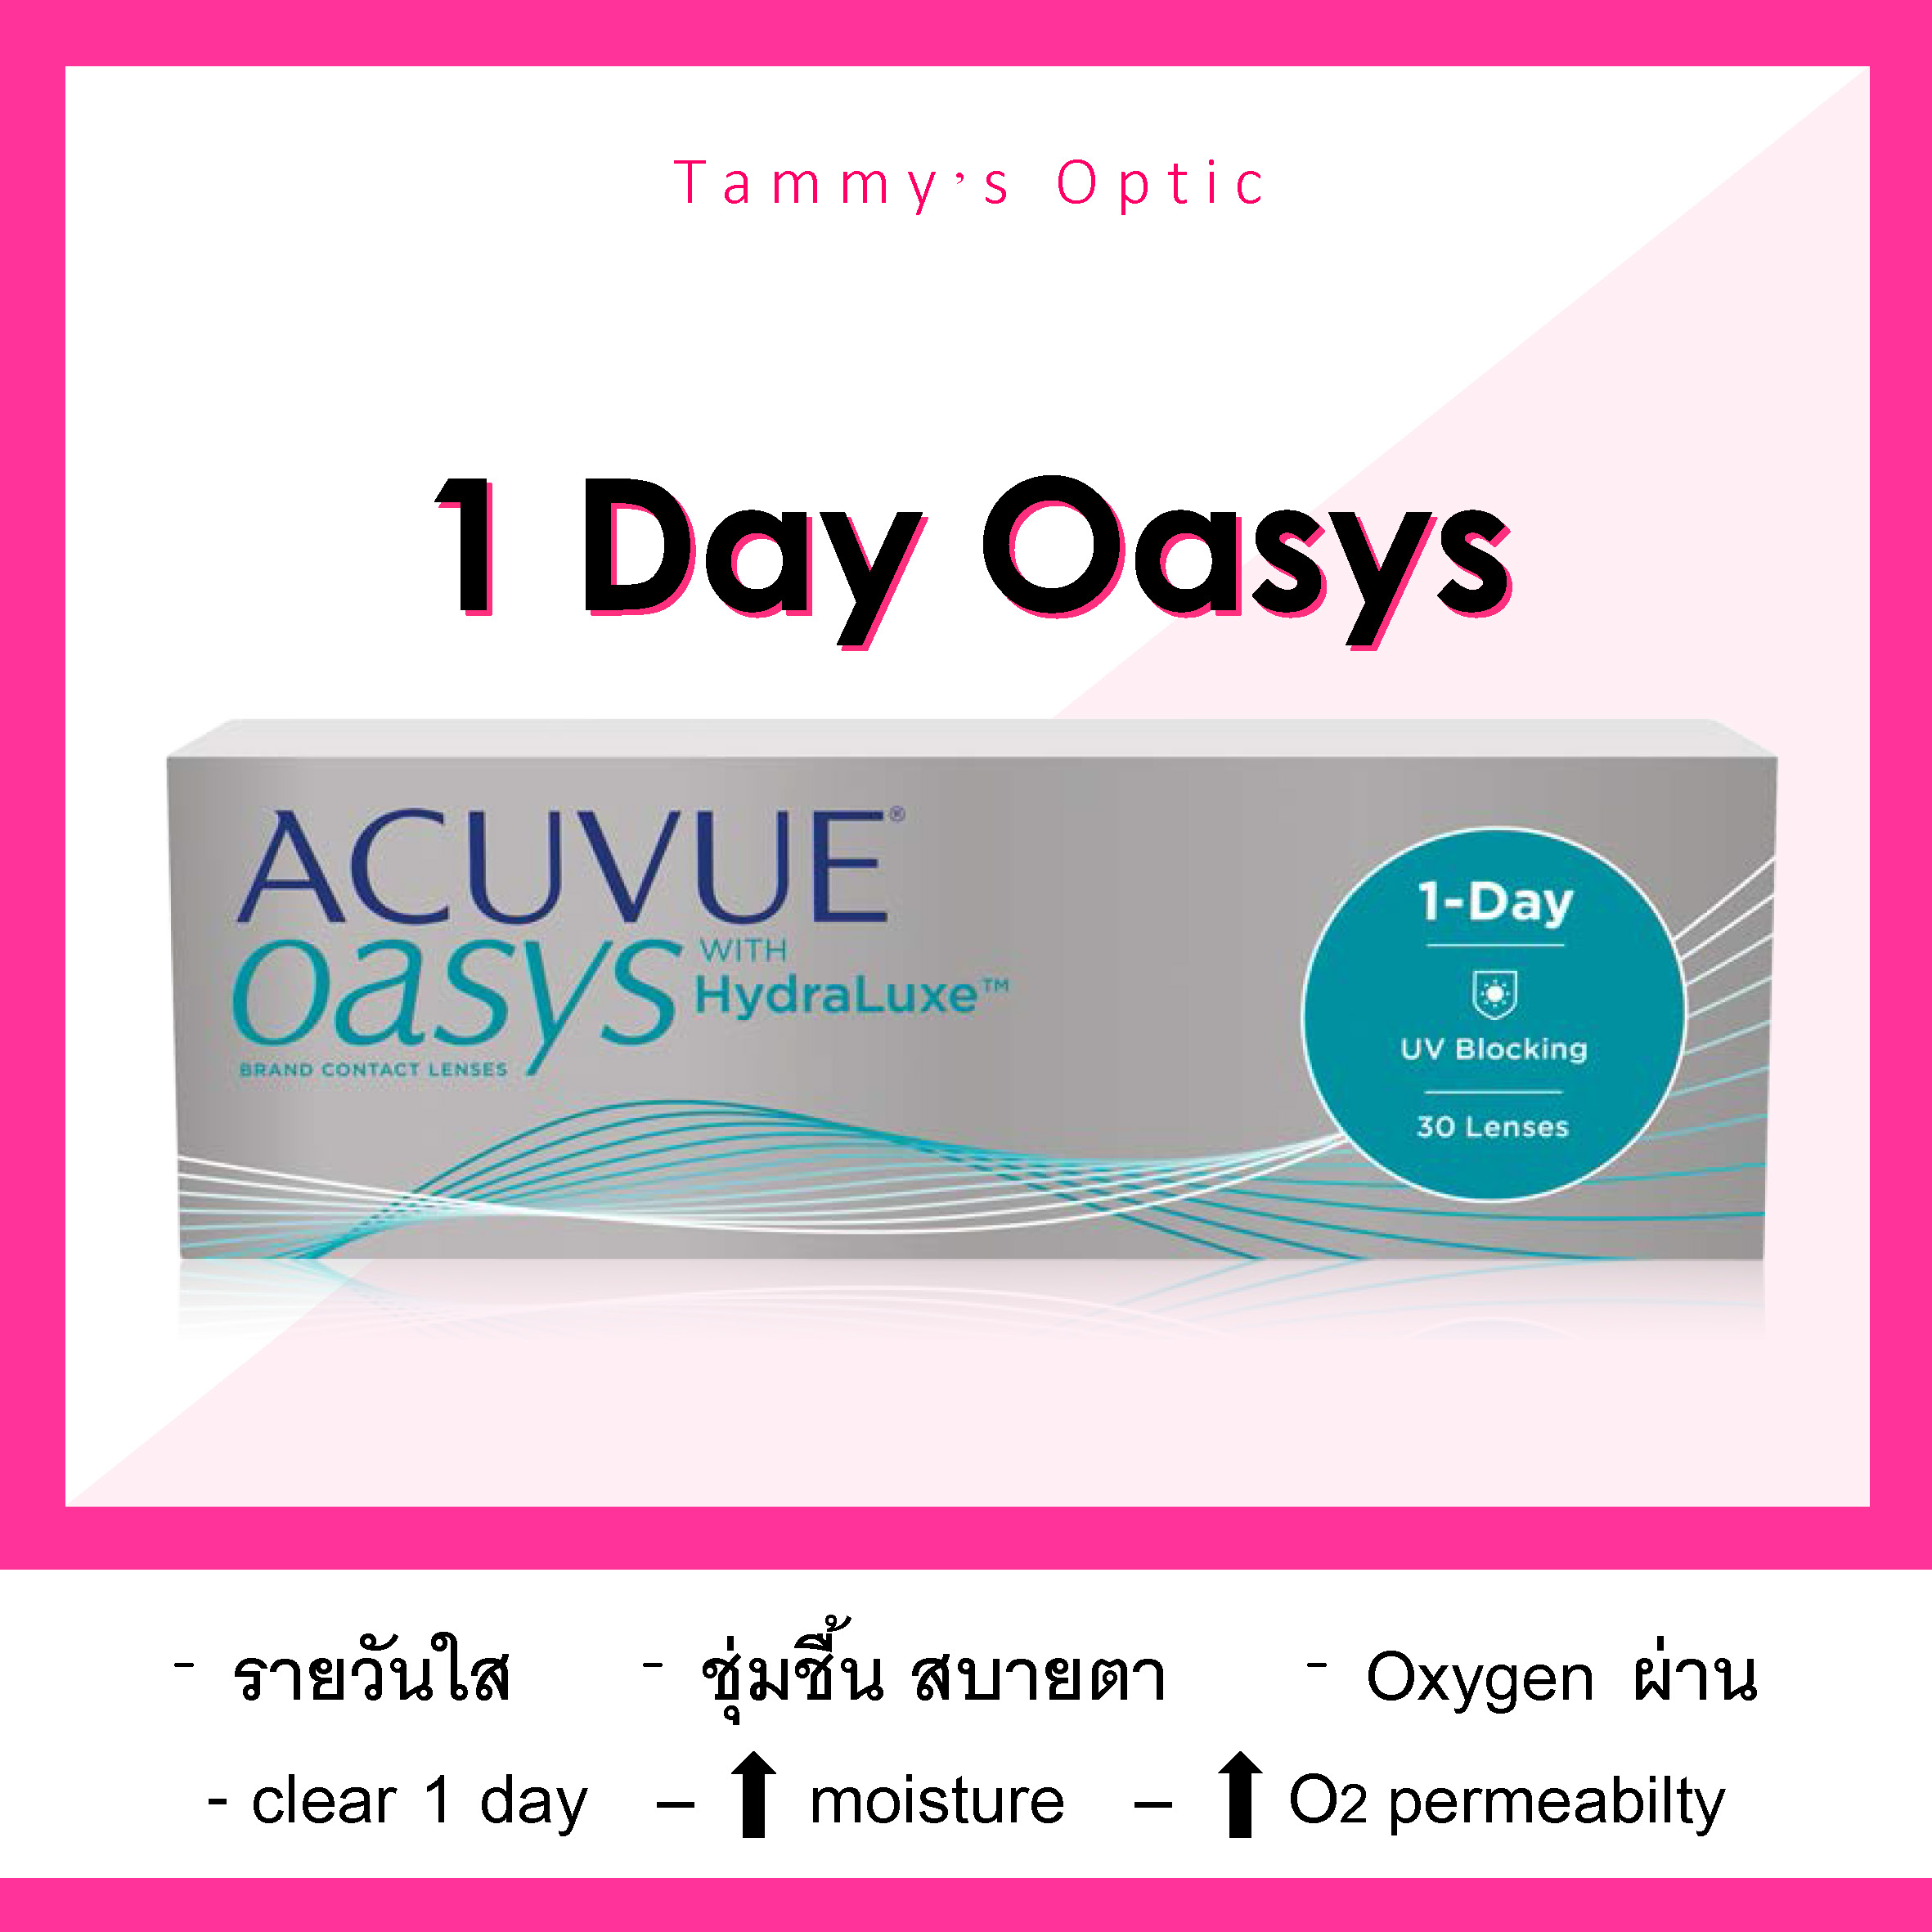 ACUVUE 1 DAY OASYS basecurve 9.0 tammy's optic